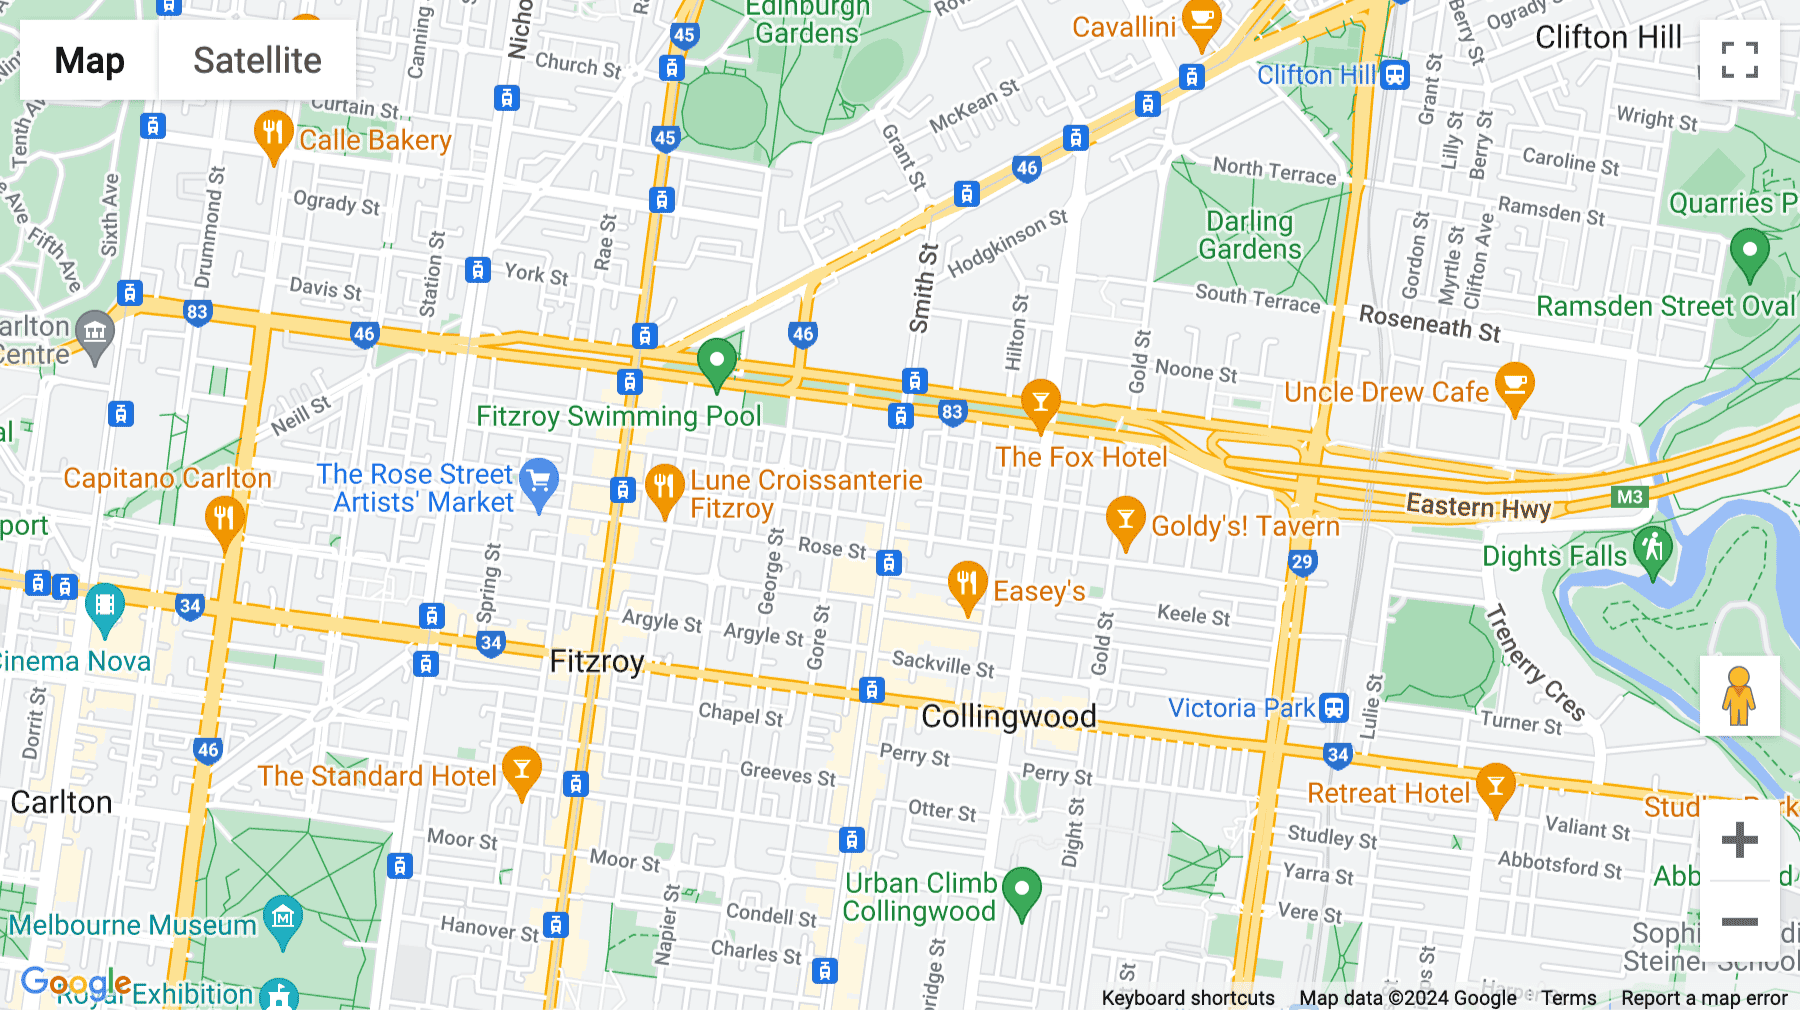 Click for interative map of 425 Smith Street, Fitzroy, Melbourne